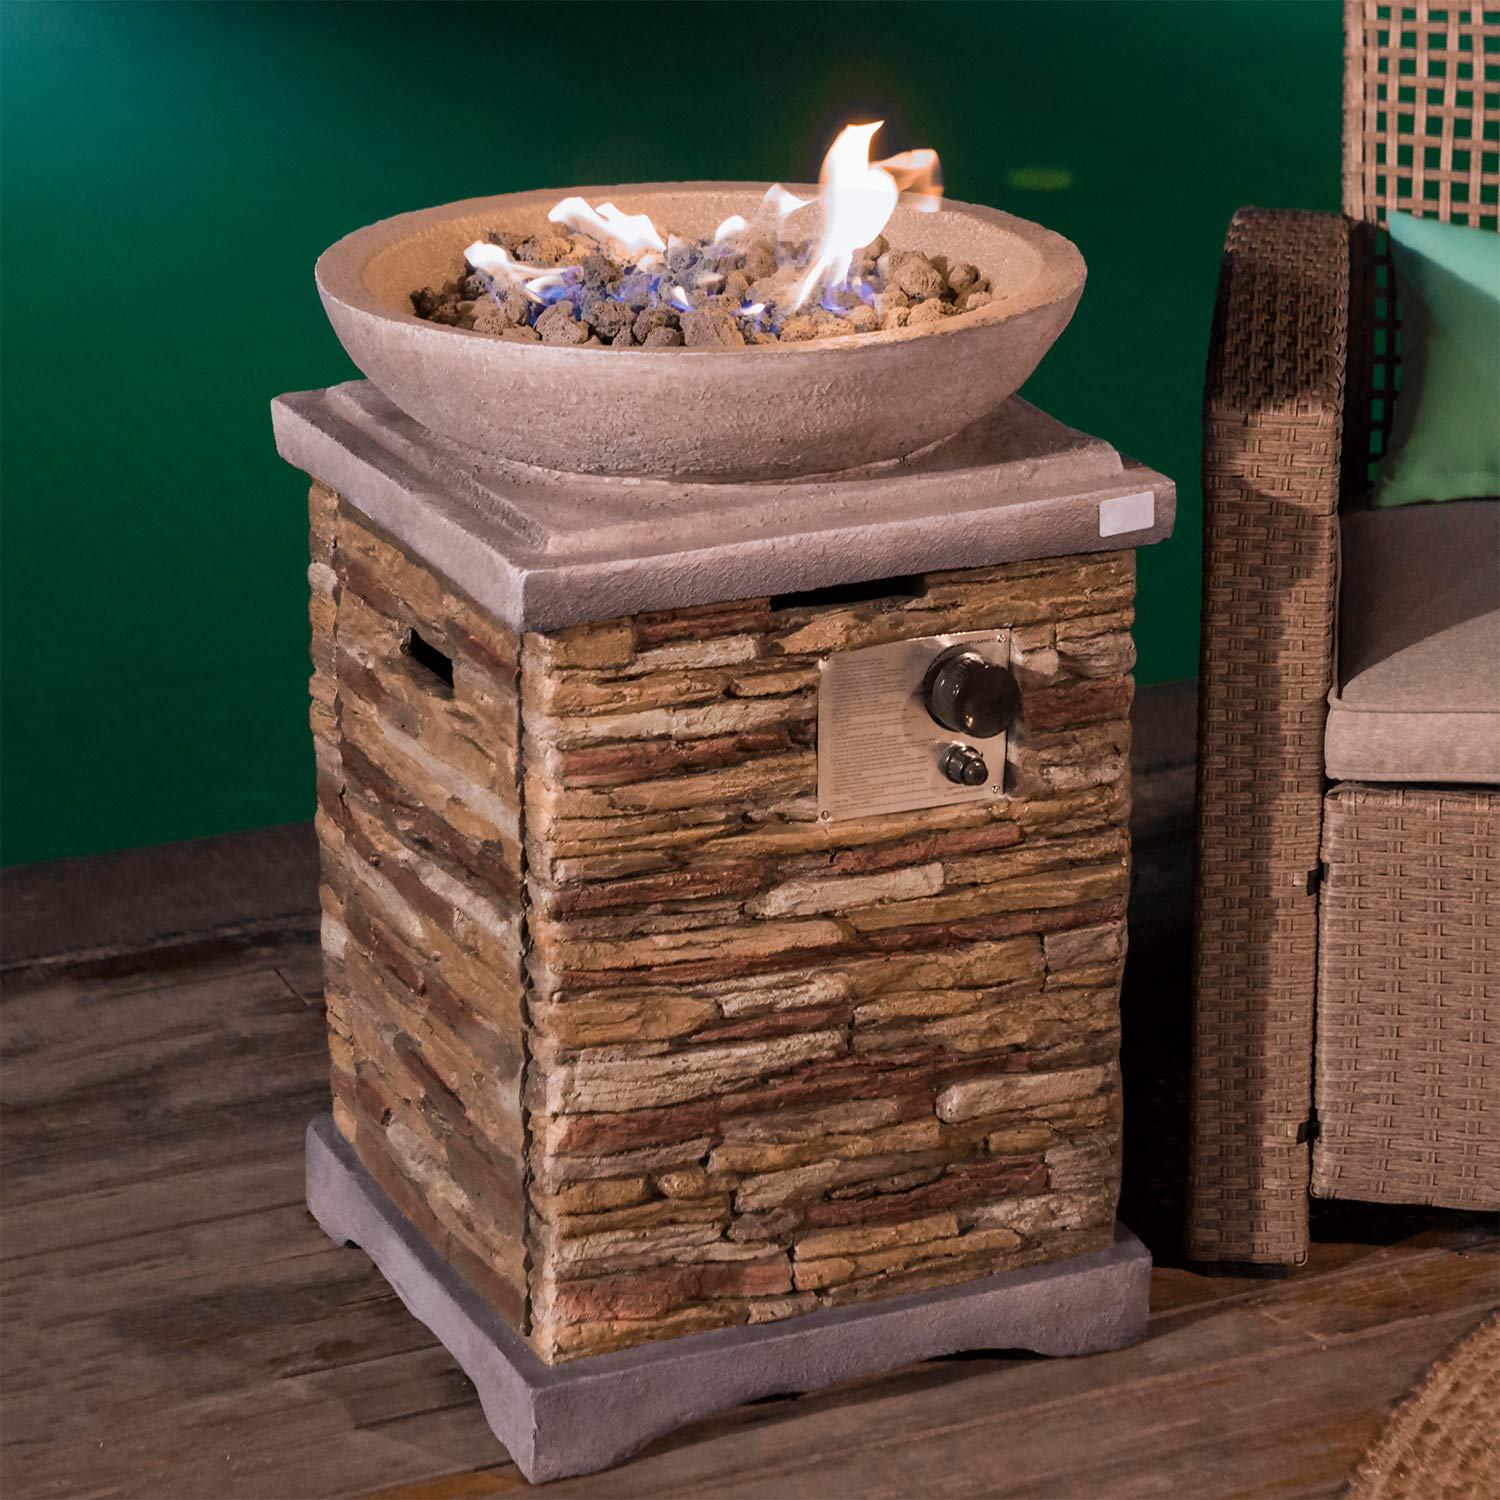 COSIEST Outdoor Propane Fire Pit Table w Faux Brown Compact Ledge Stone 20-inch Square Base and Faux Rose-Marble Round Bowl, 40,000 BTU, Free Lava Rocks, Fits 20lb Tank Inside, Raincover